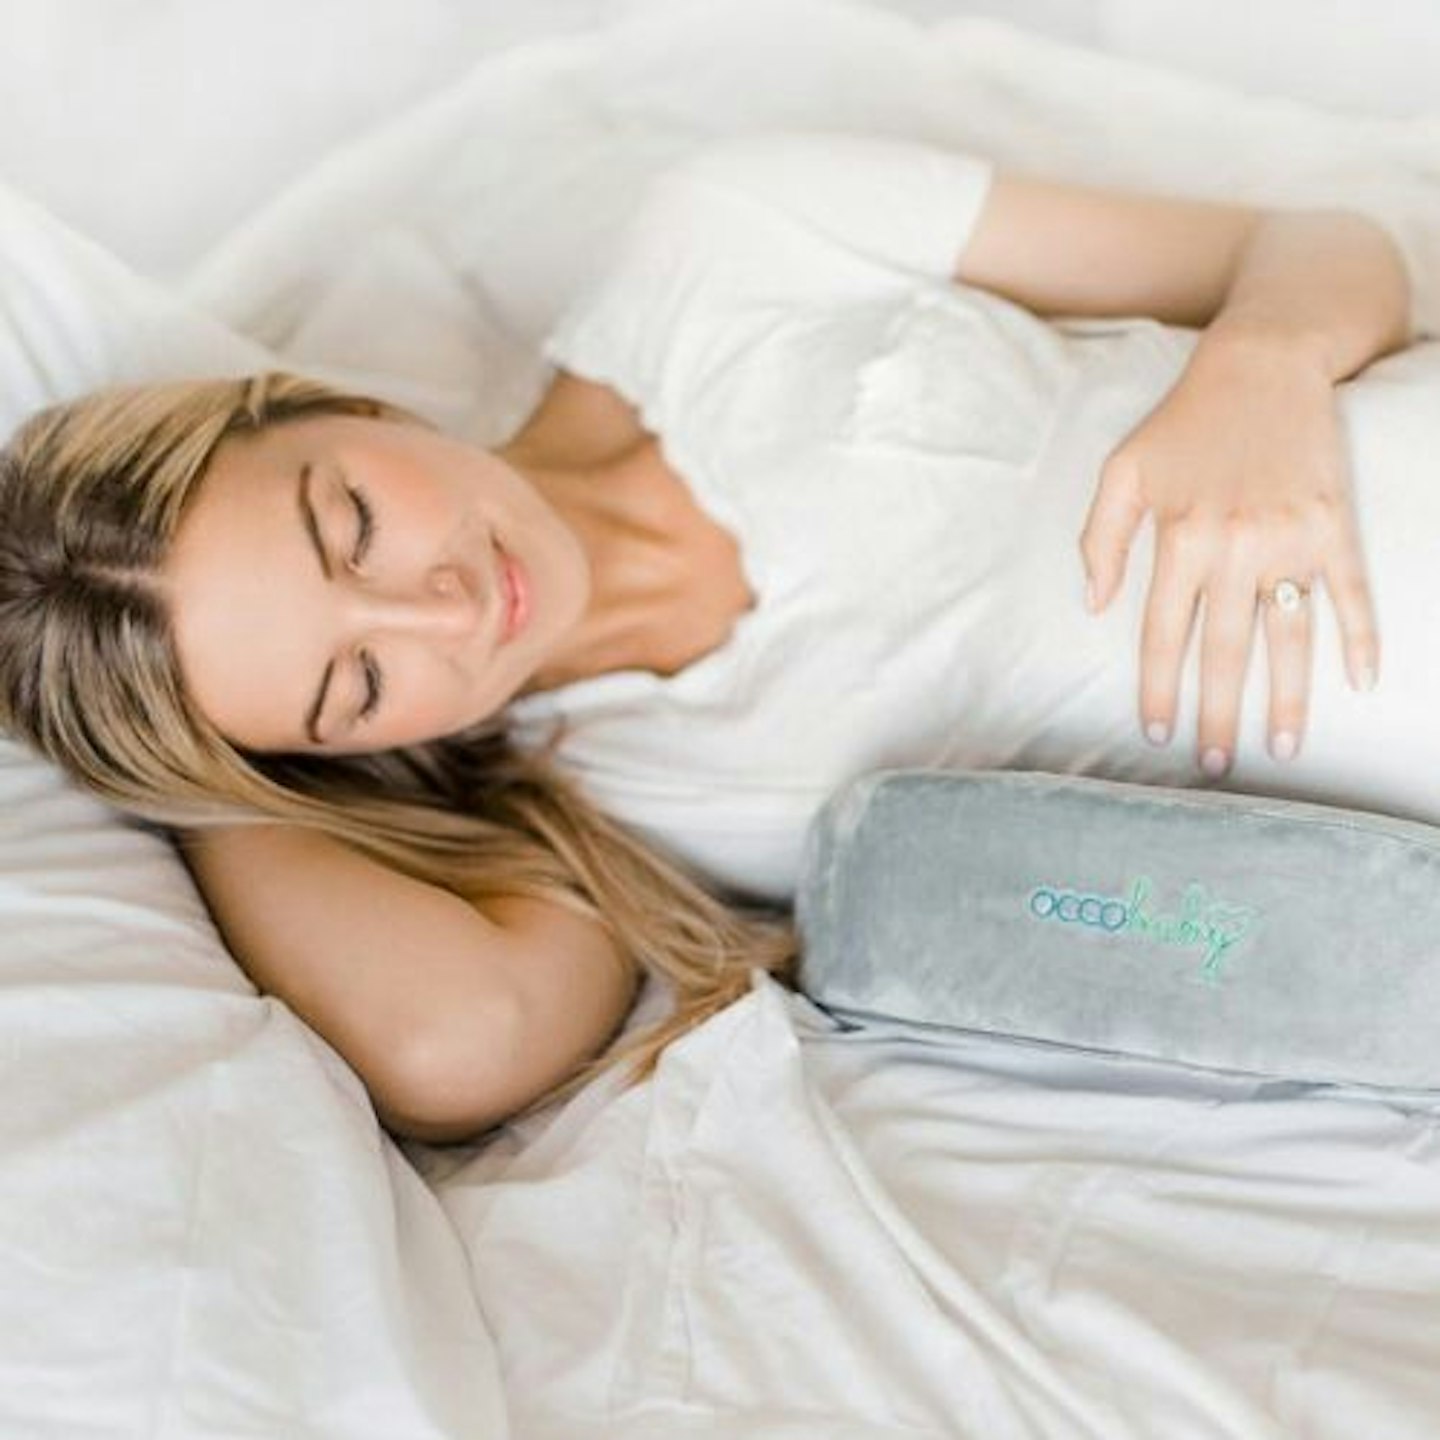 OCCObaby Pregnancy Wedge Pillow for Sleeping